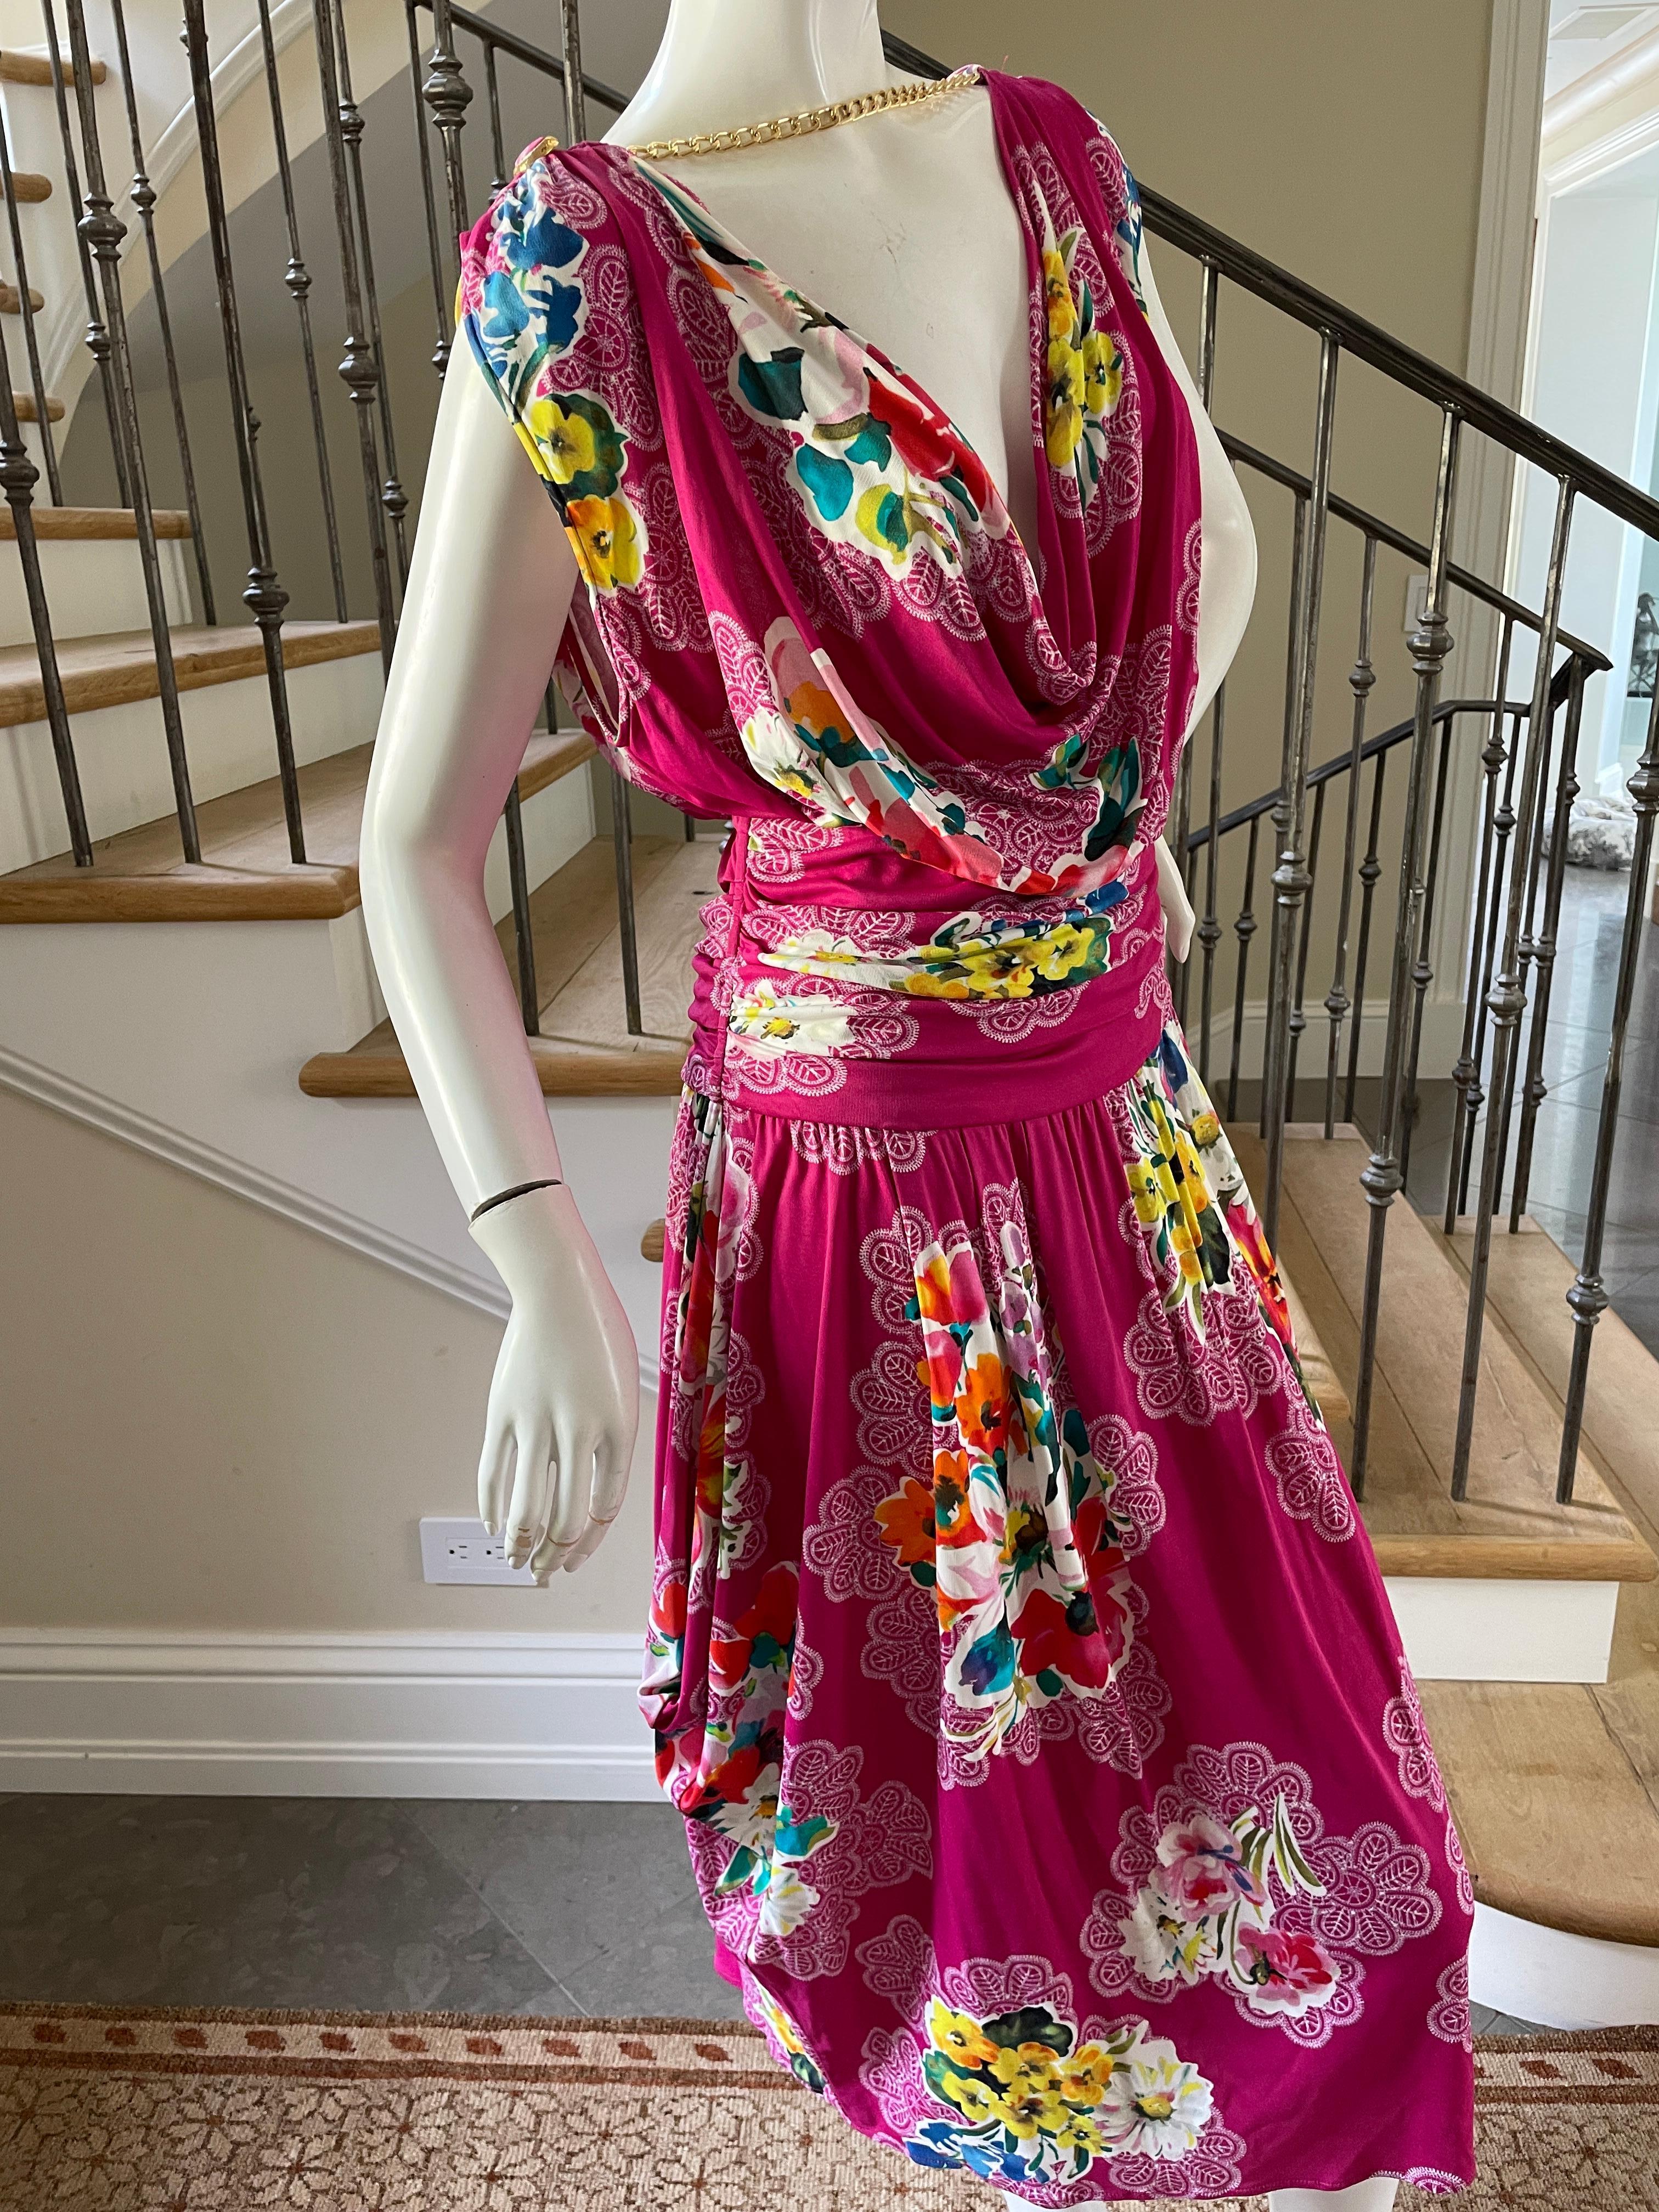 Dolce & Gabbana for D&G Vintage Floral Dress with Draped Gold Chain Details For Sale 1